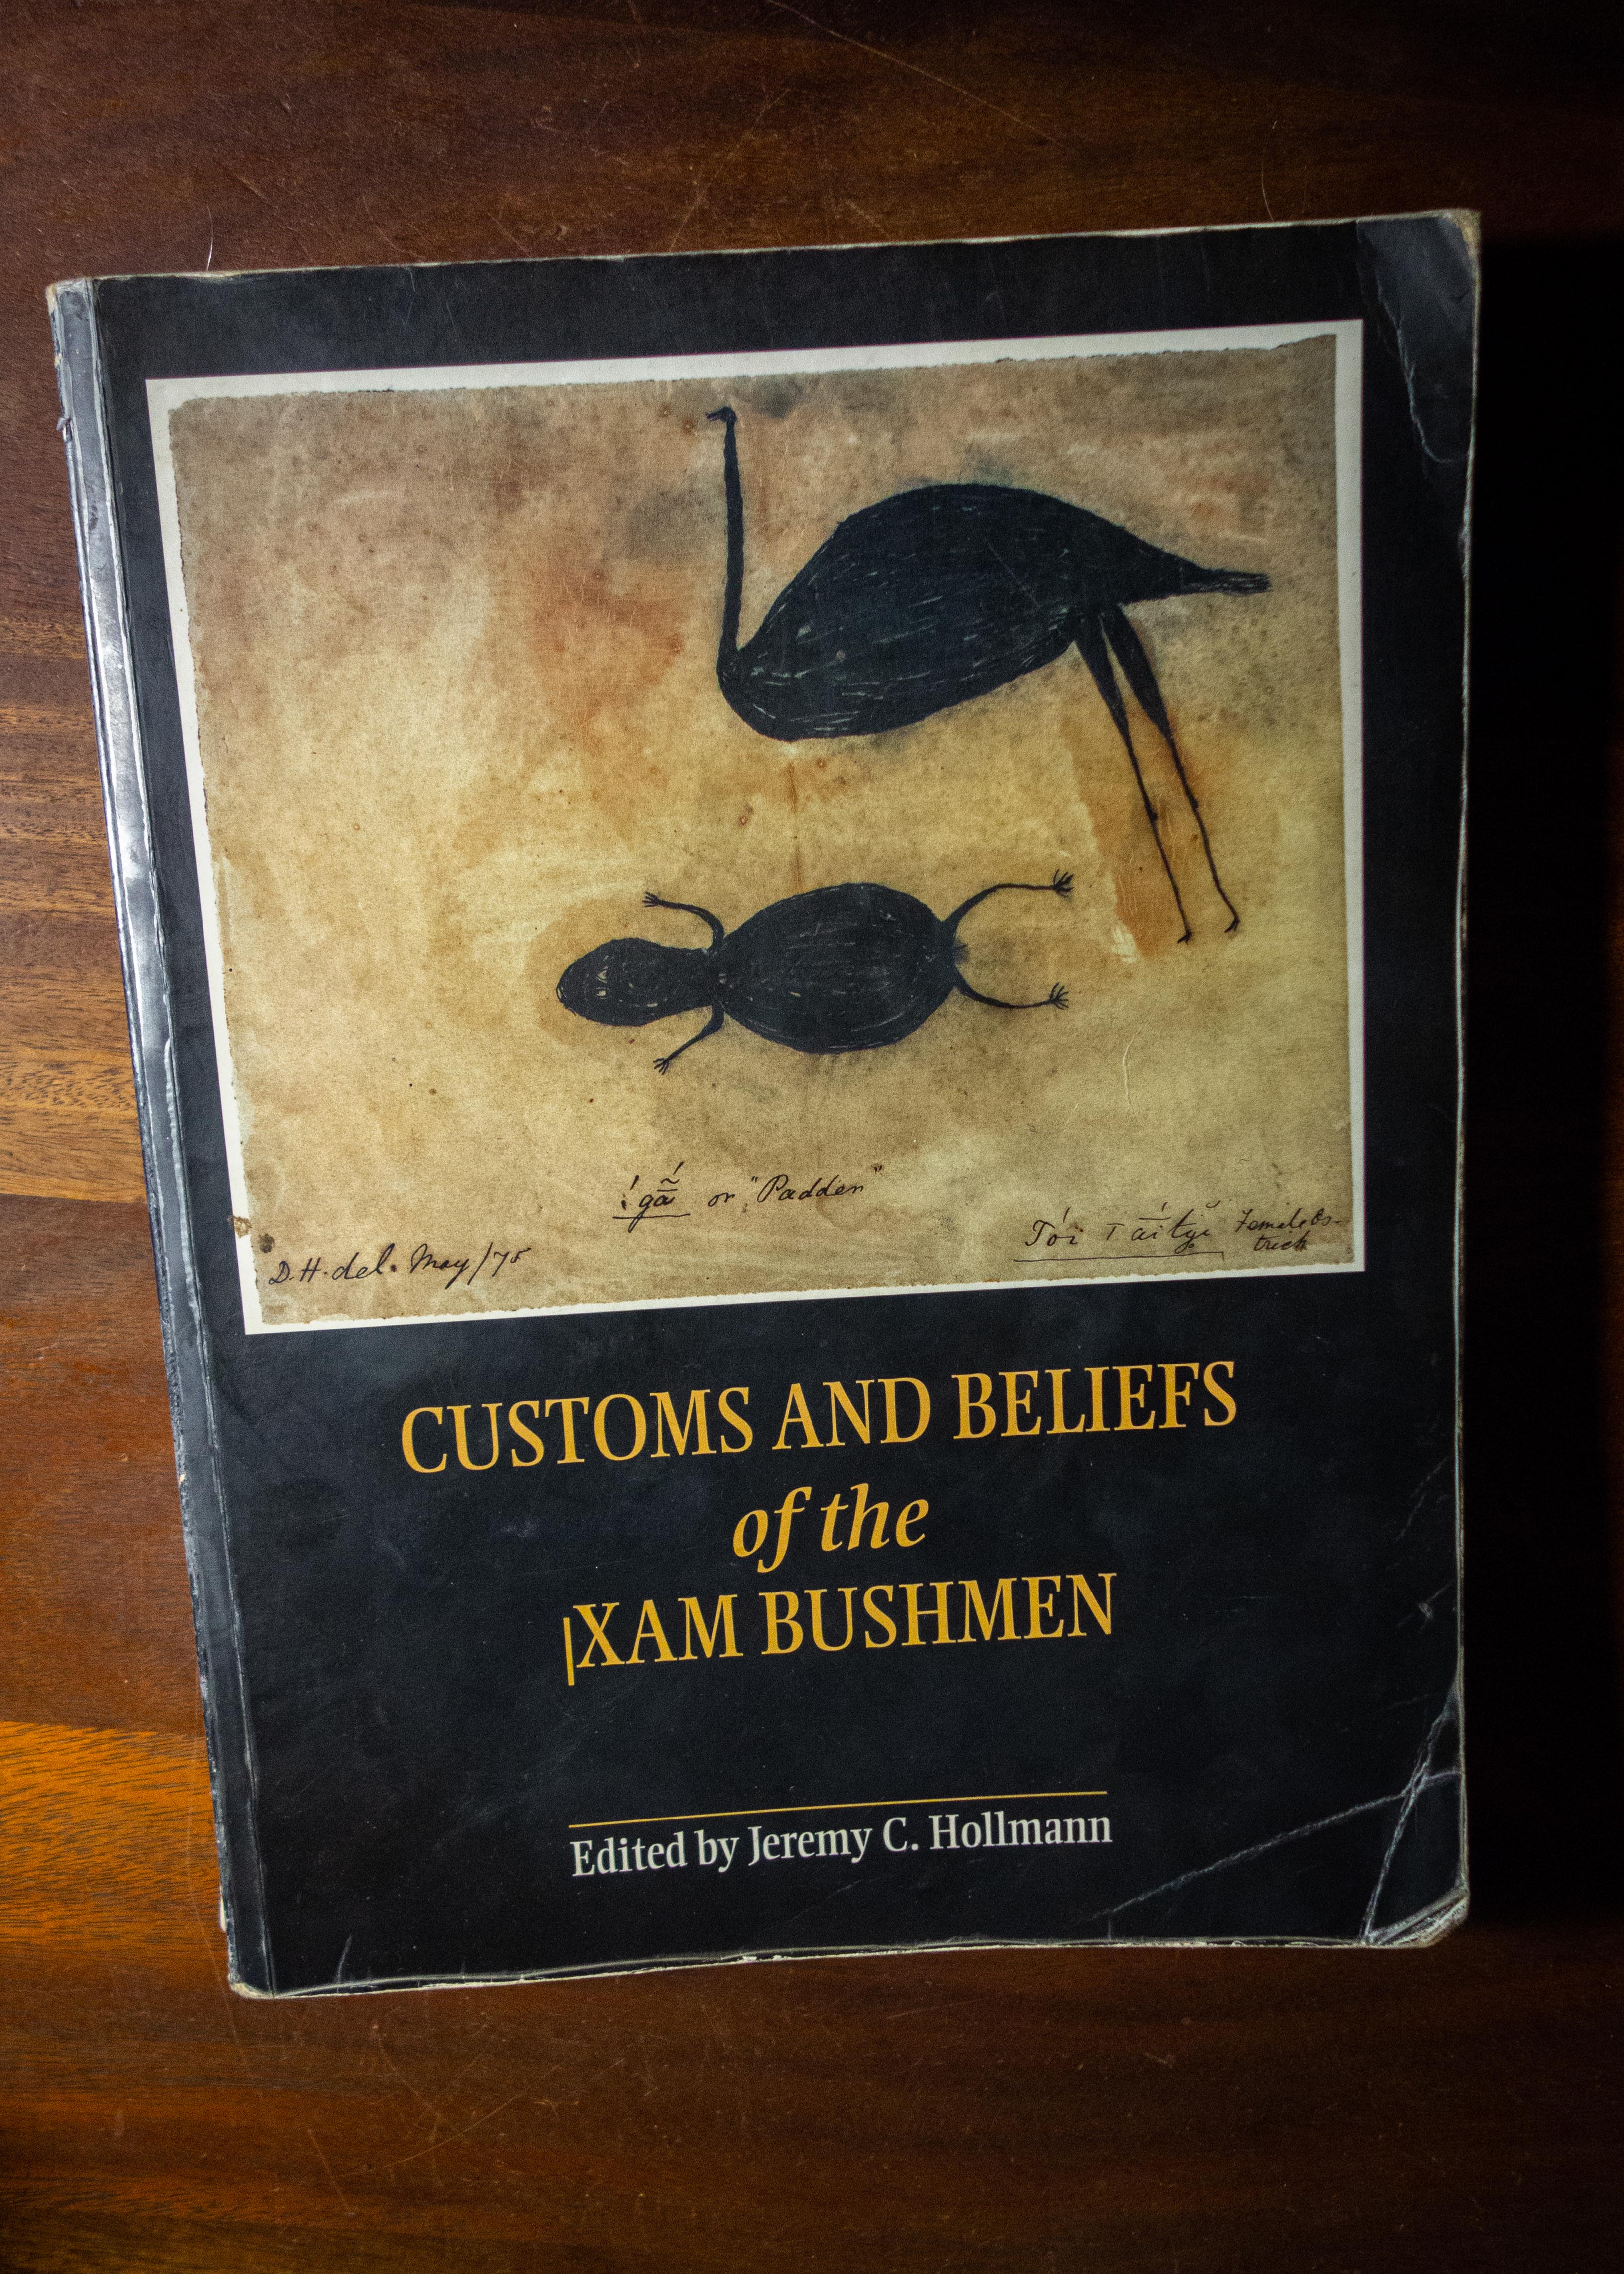 The 1st edition of the edited and annotated Customs & Beliefs of the /xam Bushmen